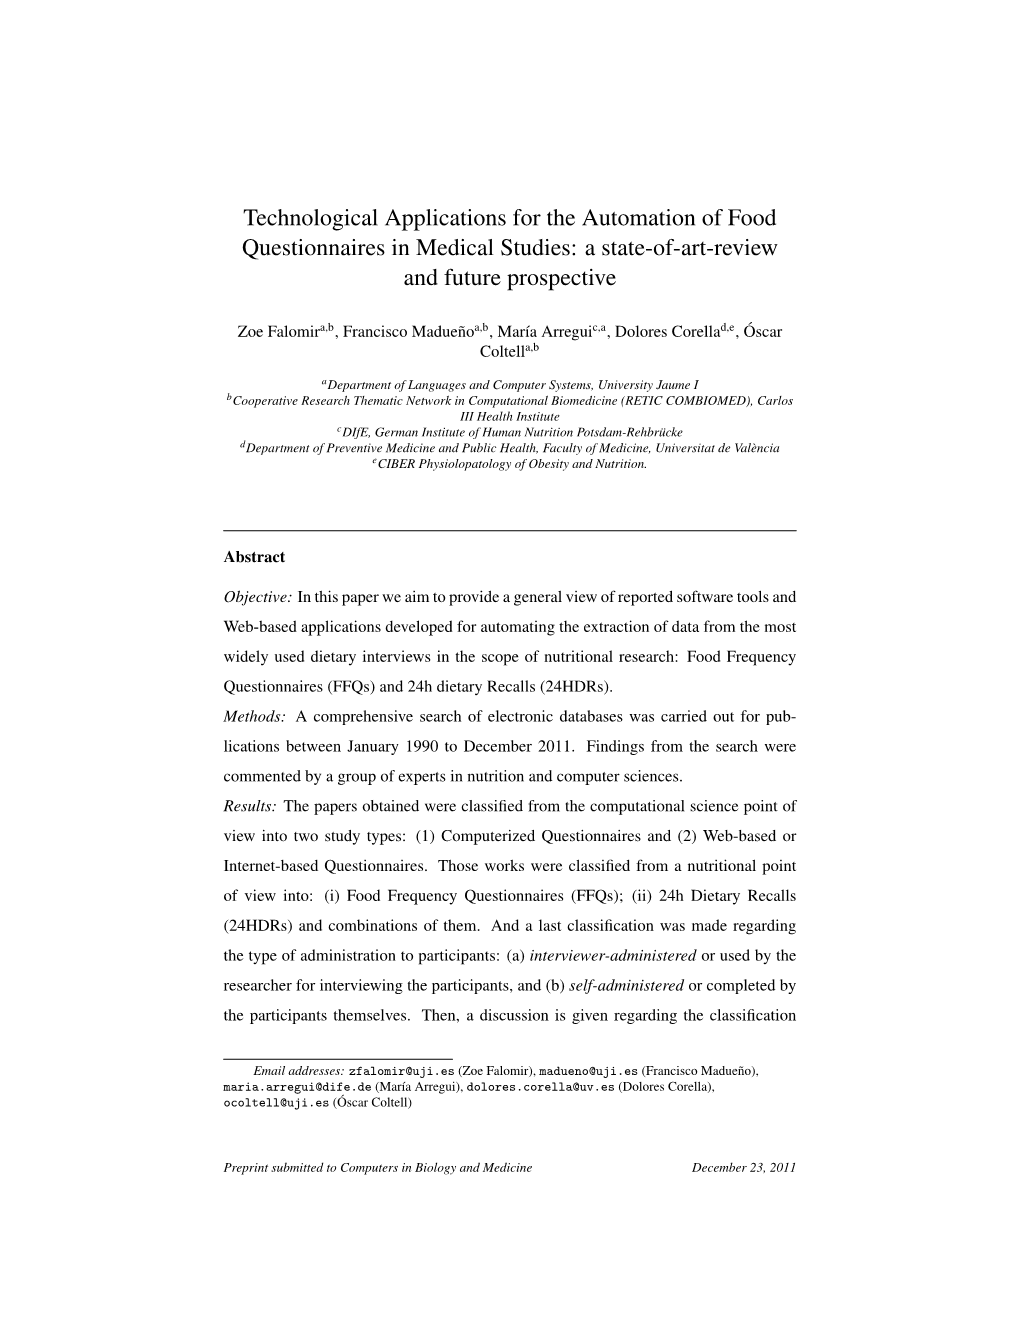 Technological Applications for the Automation of Food Questionnaires in Medical Studies: a State-Of-Art-Review and Future Prospective